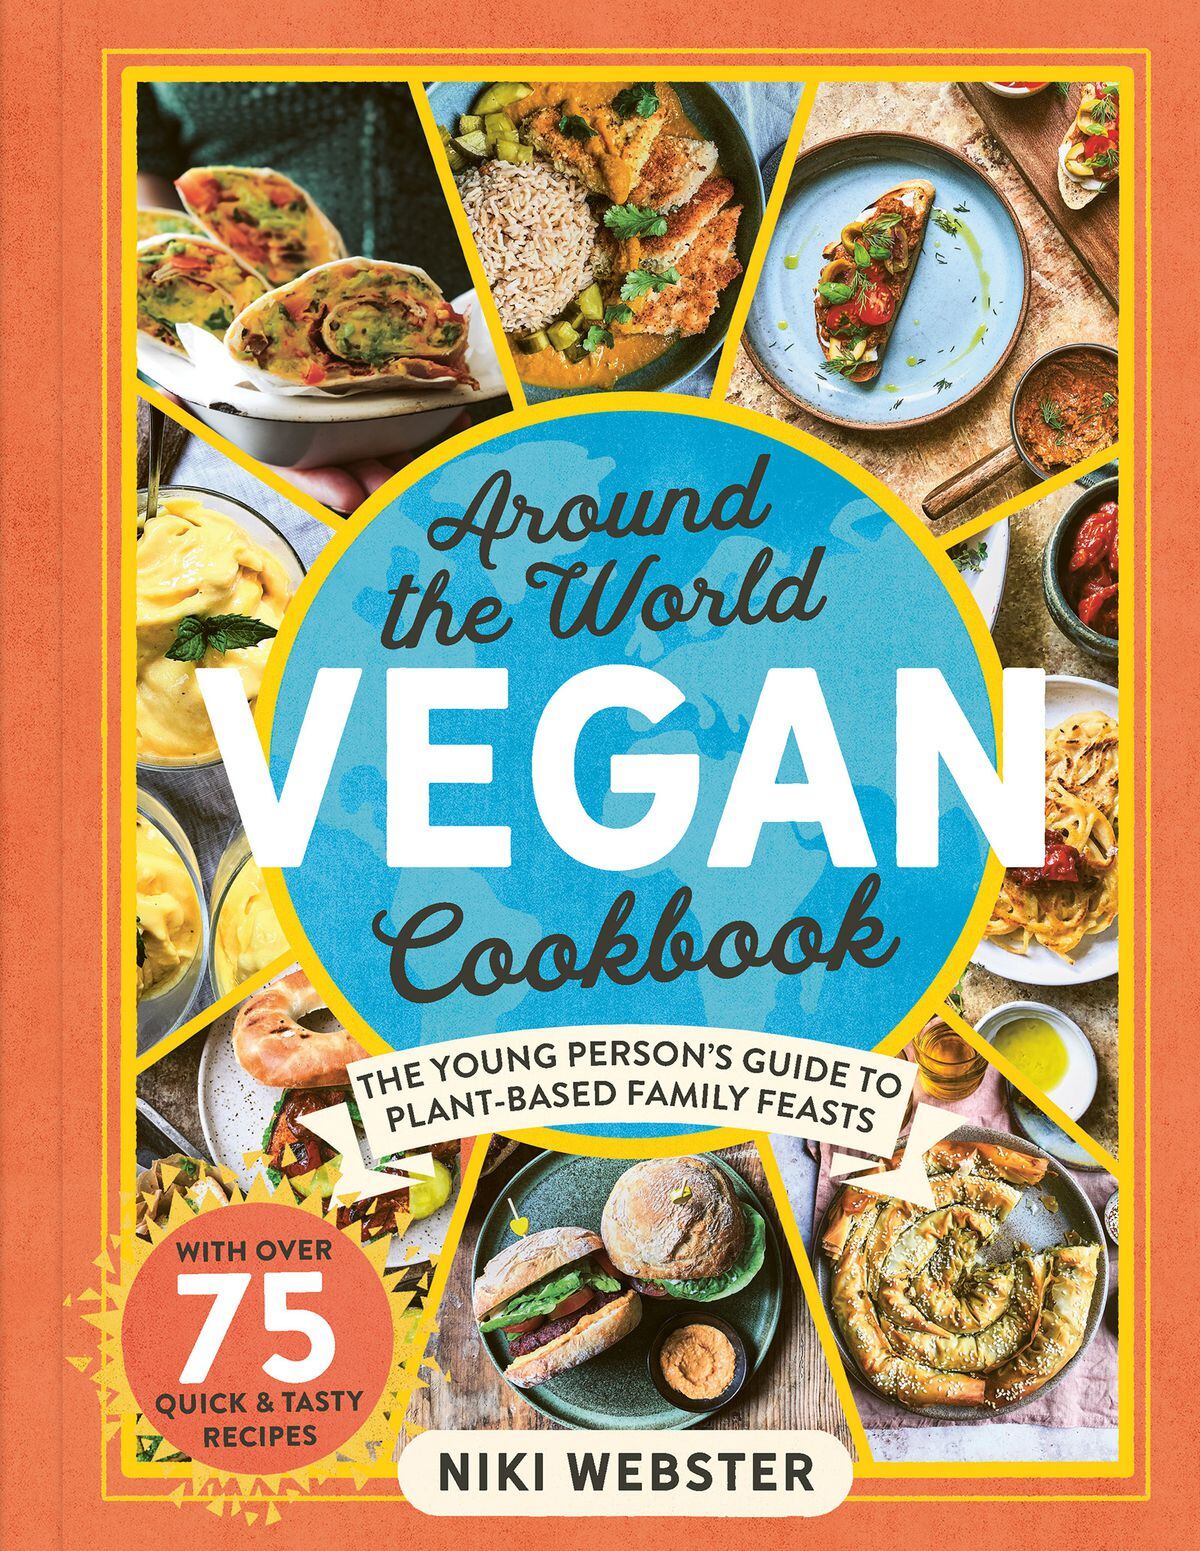 Around the World Vegan Cookbook: The Young Person’s Guide to Plant-Based Family Feasts